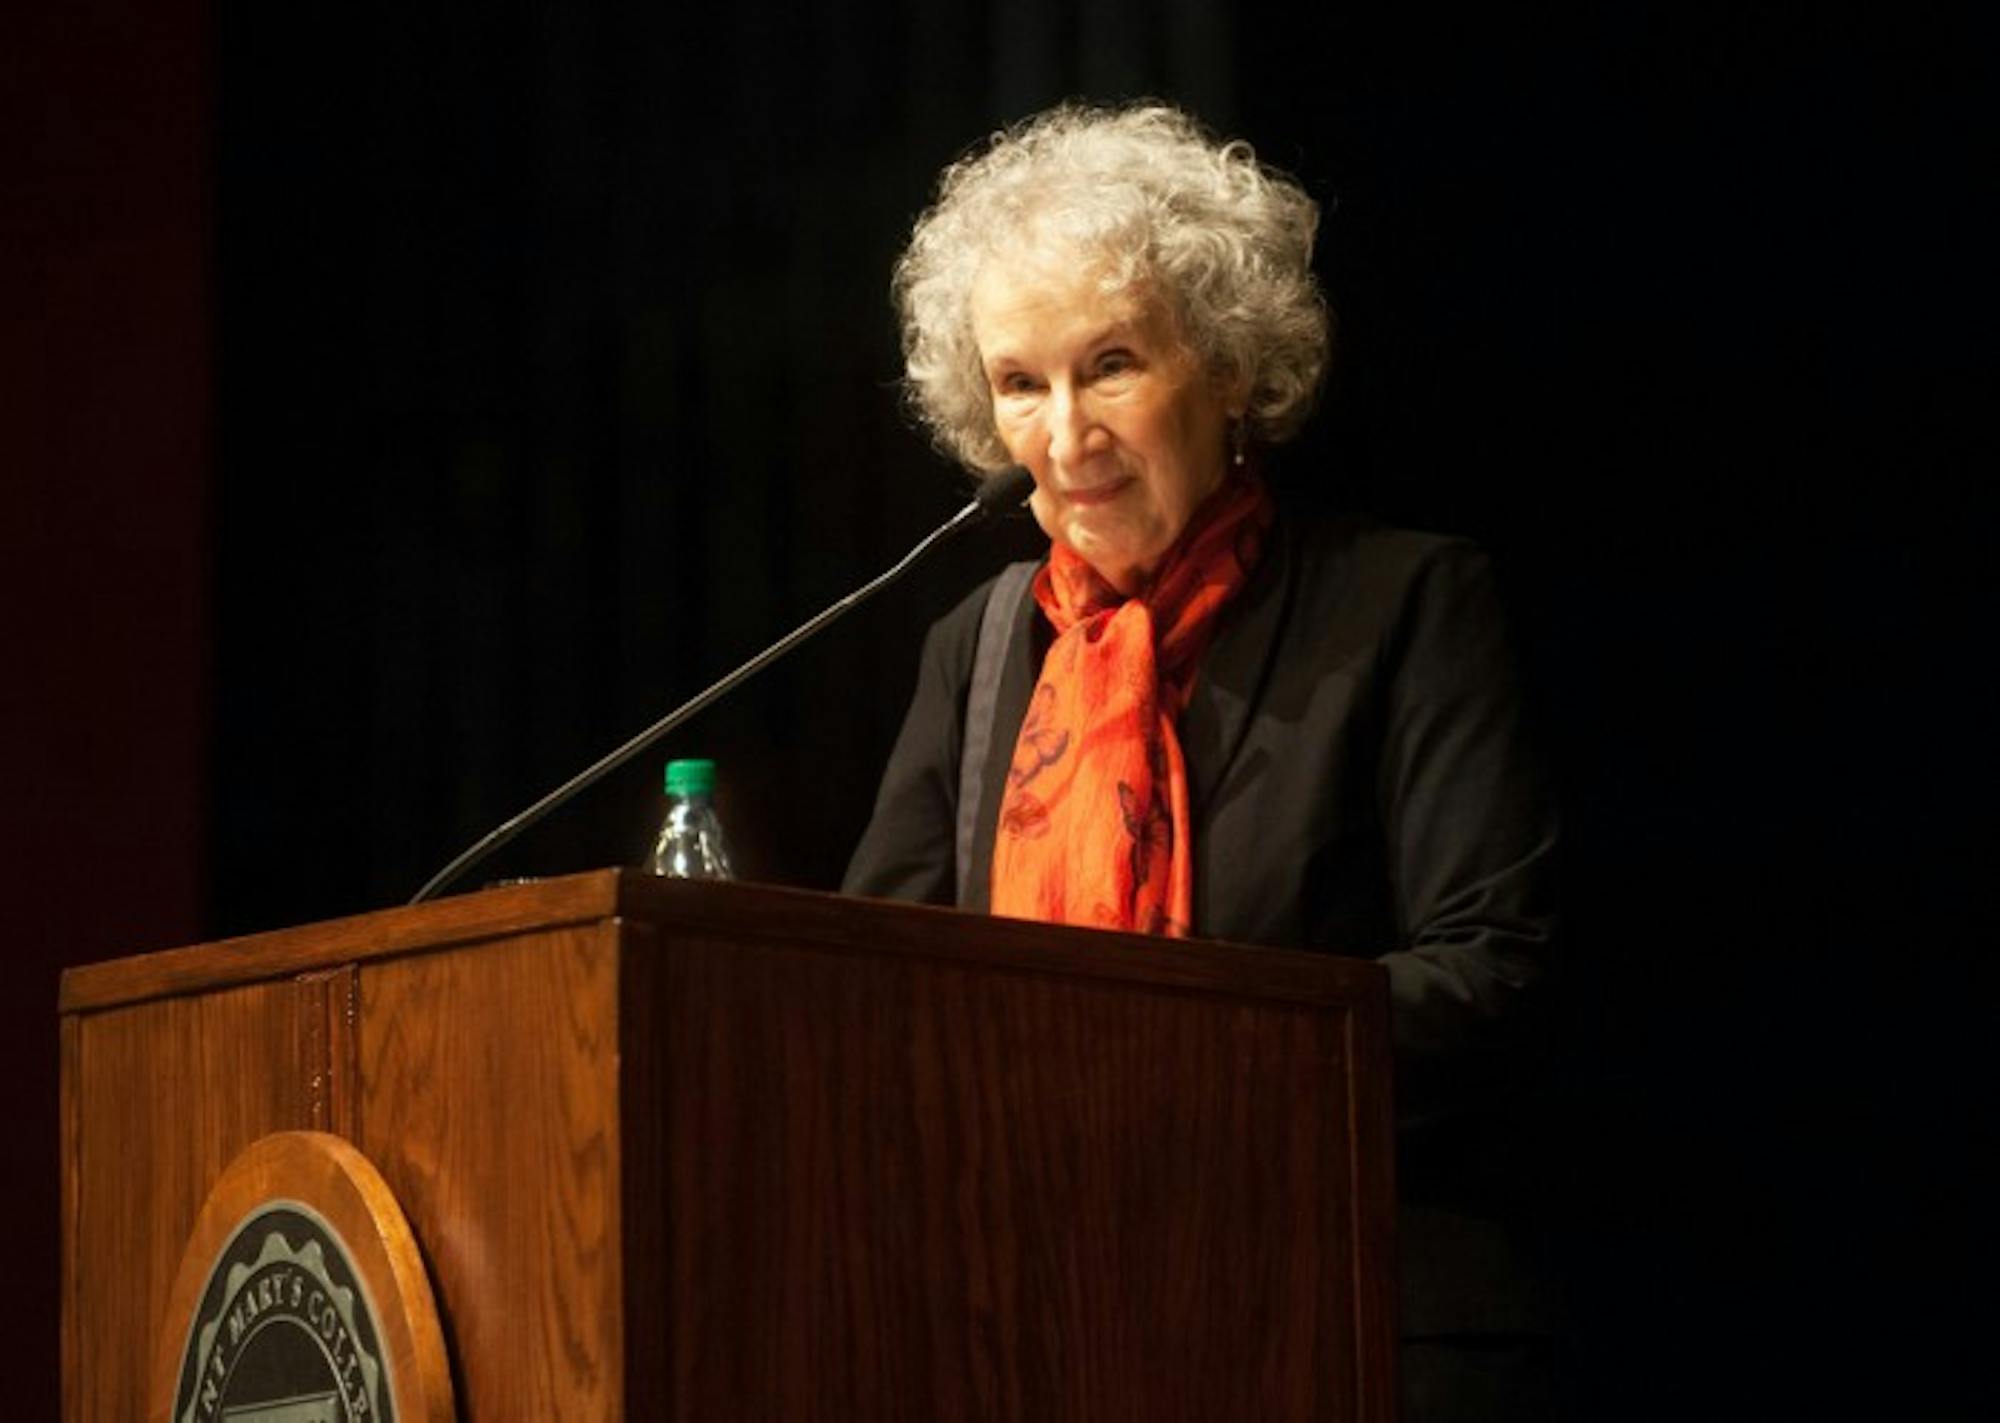 Margaret Atwood, author of “The Handmaid's Tale”, listens to an audience question during the annual Christian Culture Lecture at Saint Mary's. Atwood discussed the relevance of her novel, which depicts a world in which women are severely oppressed.